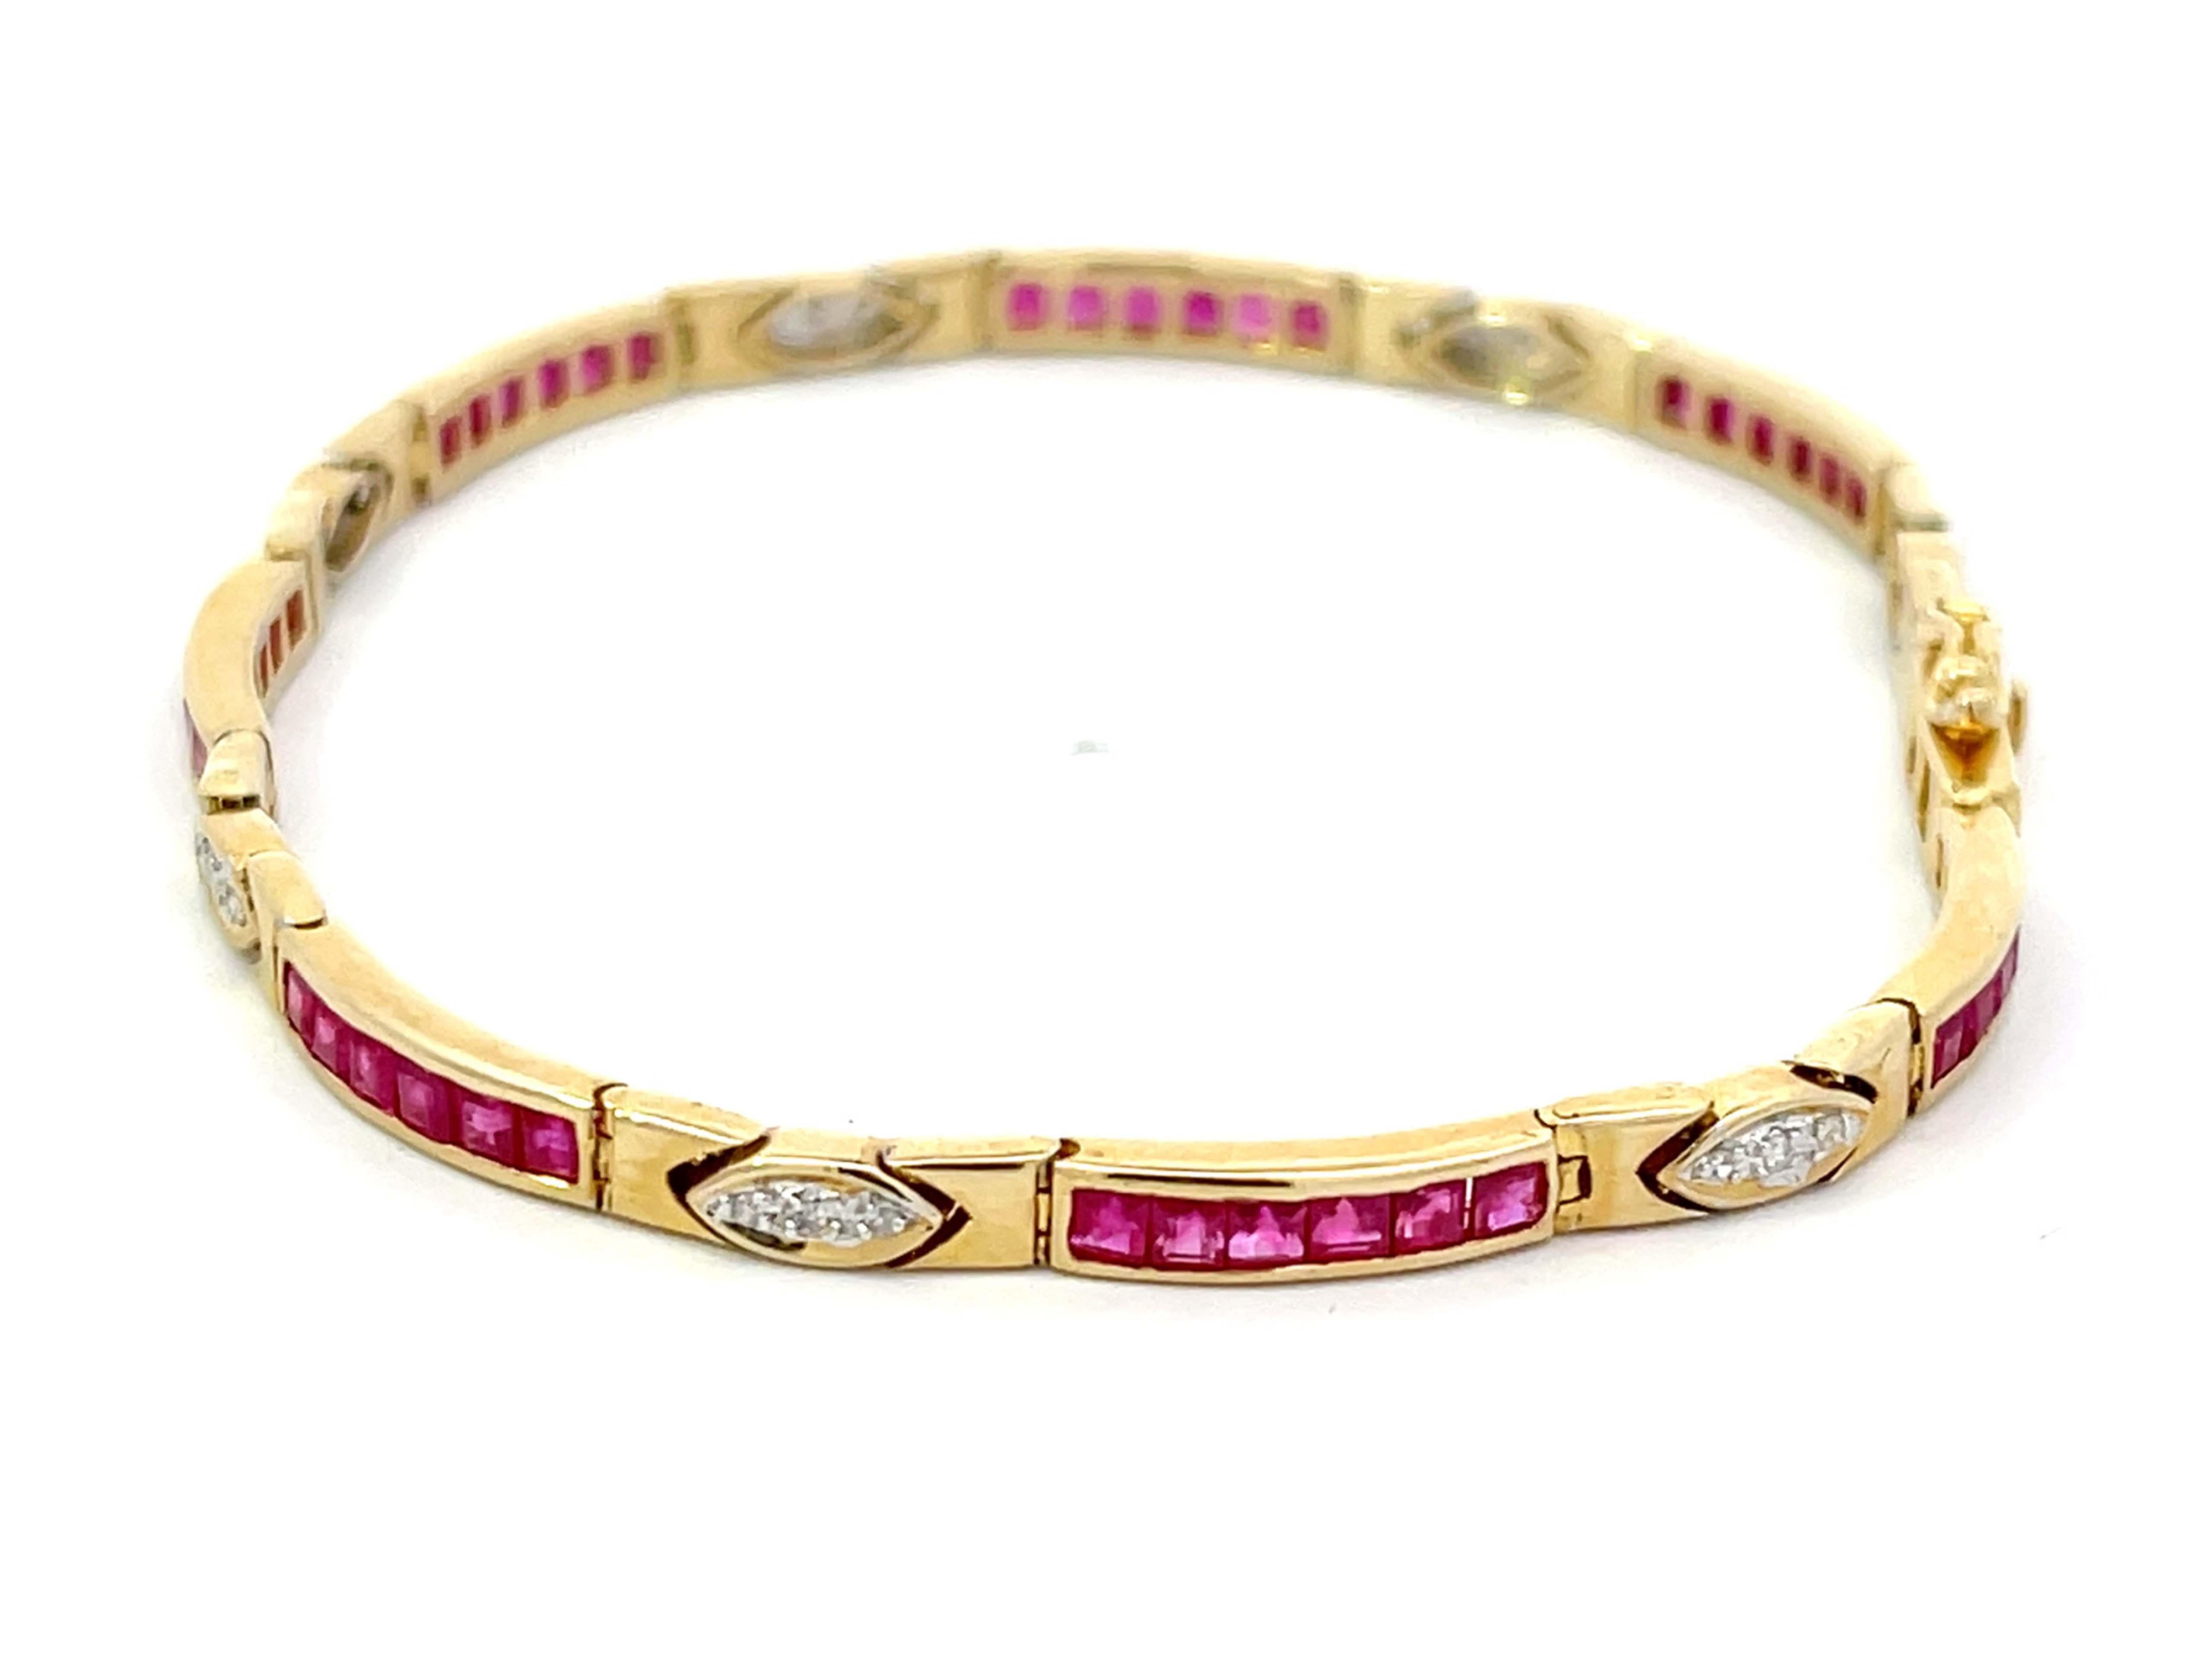 Princess Cut Red Ruby and Diamond Link Bracelet in 14k Yellow Gold In Excellent Condition For Sale In Honolulu, HI